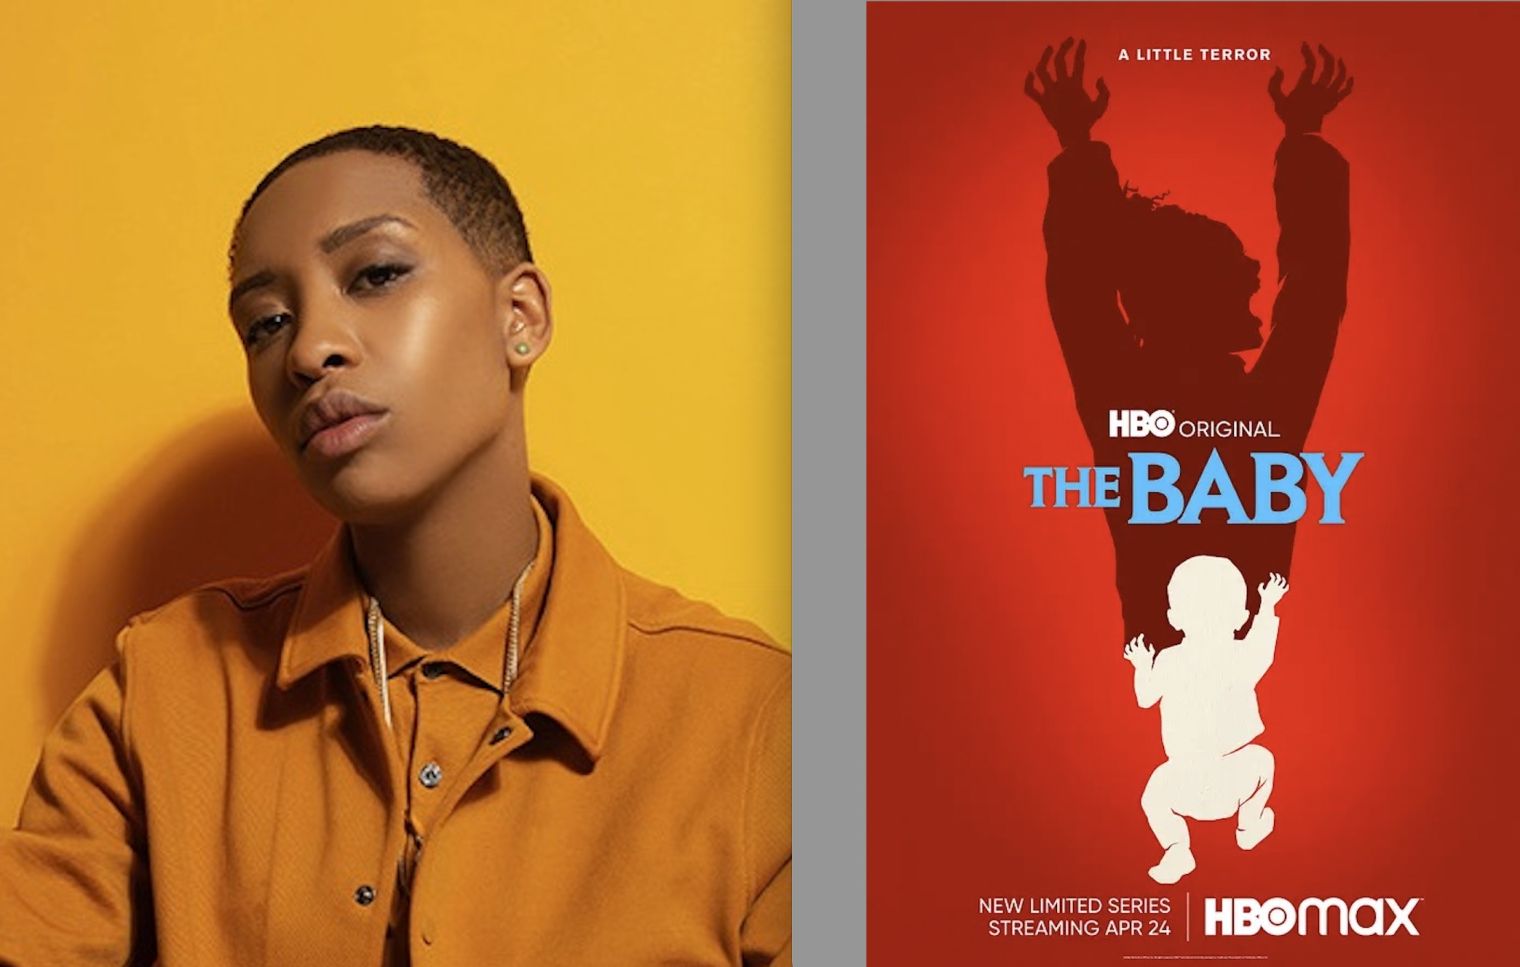 The Baby, featuring Genesis Lynea, is now available in the UK on Sky Atlantic and NOW